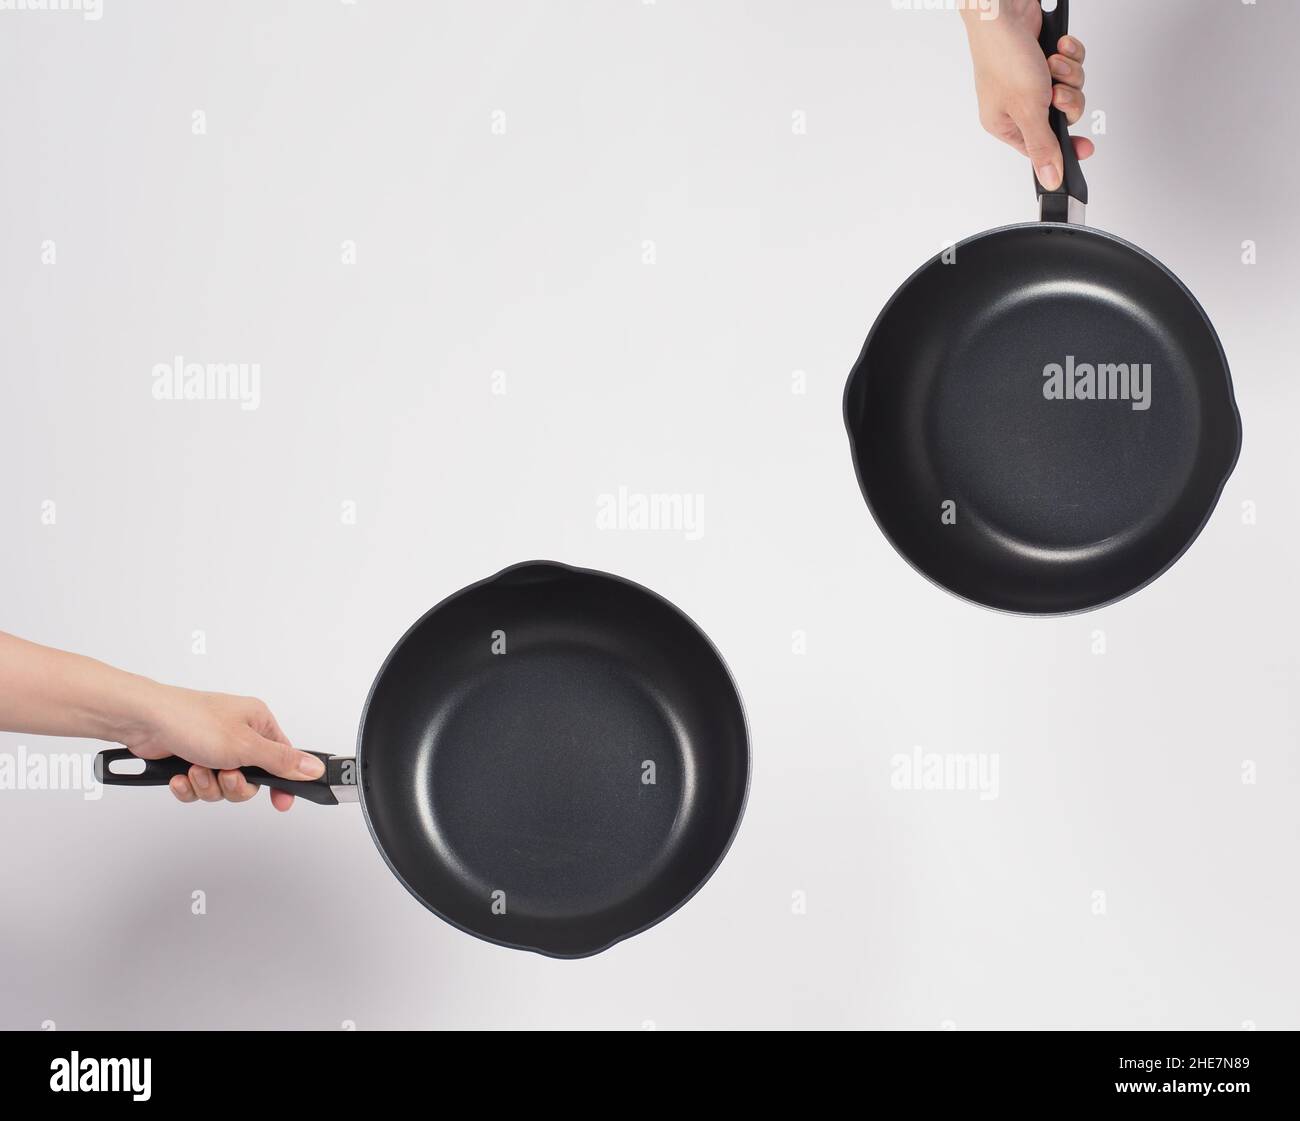 Cleaning Electric non stick pan. Hand on white background cleaning